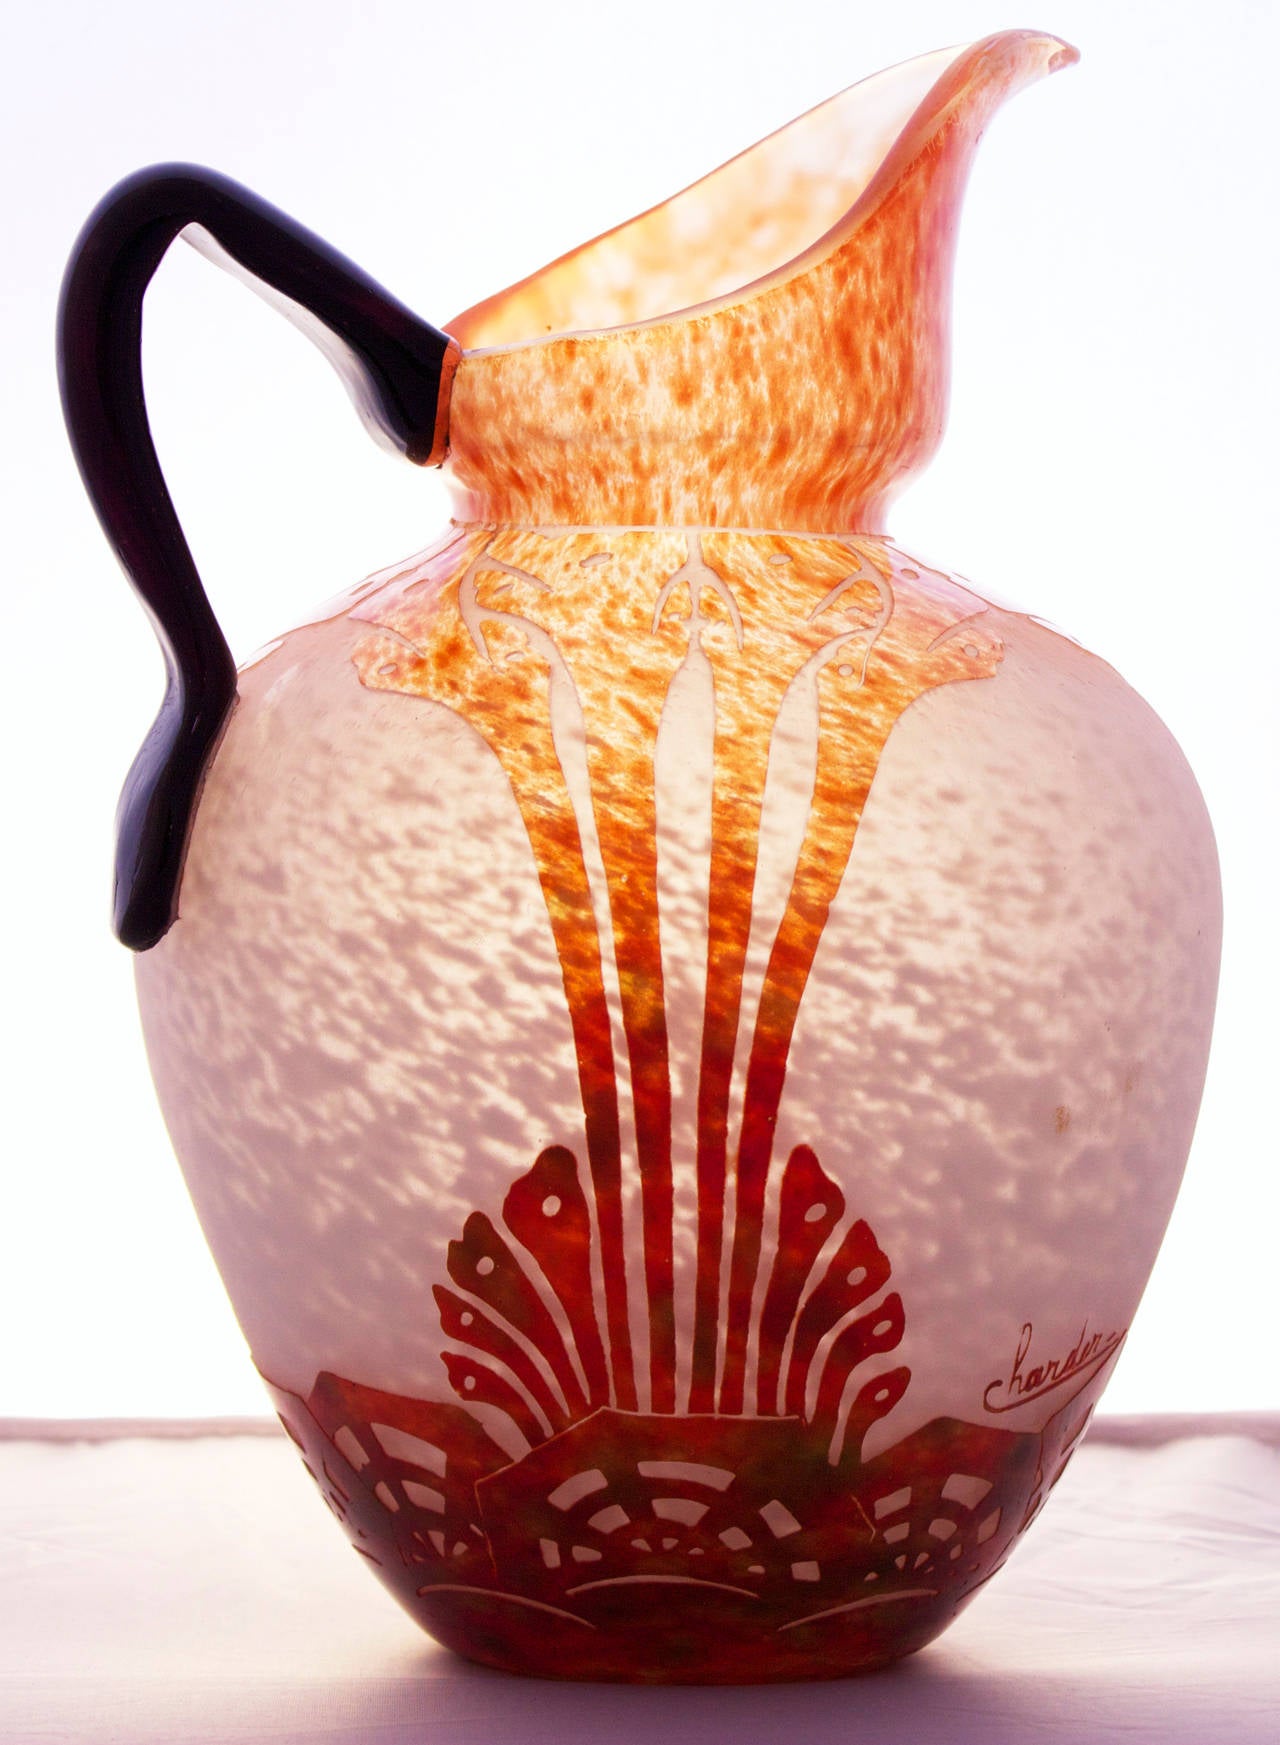 A spiritual son of Emile Galle, Charles Schneider (1882-1953) was a magician with light and helped raising the art of glassmaking to ever higher levels.
This glass pitcher shows a cutted geometric pattern in a graduation from bright orange to deep